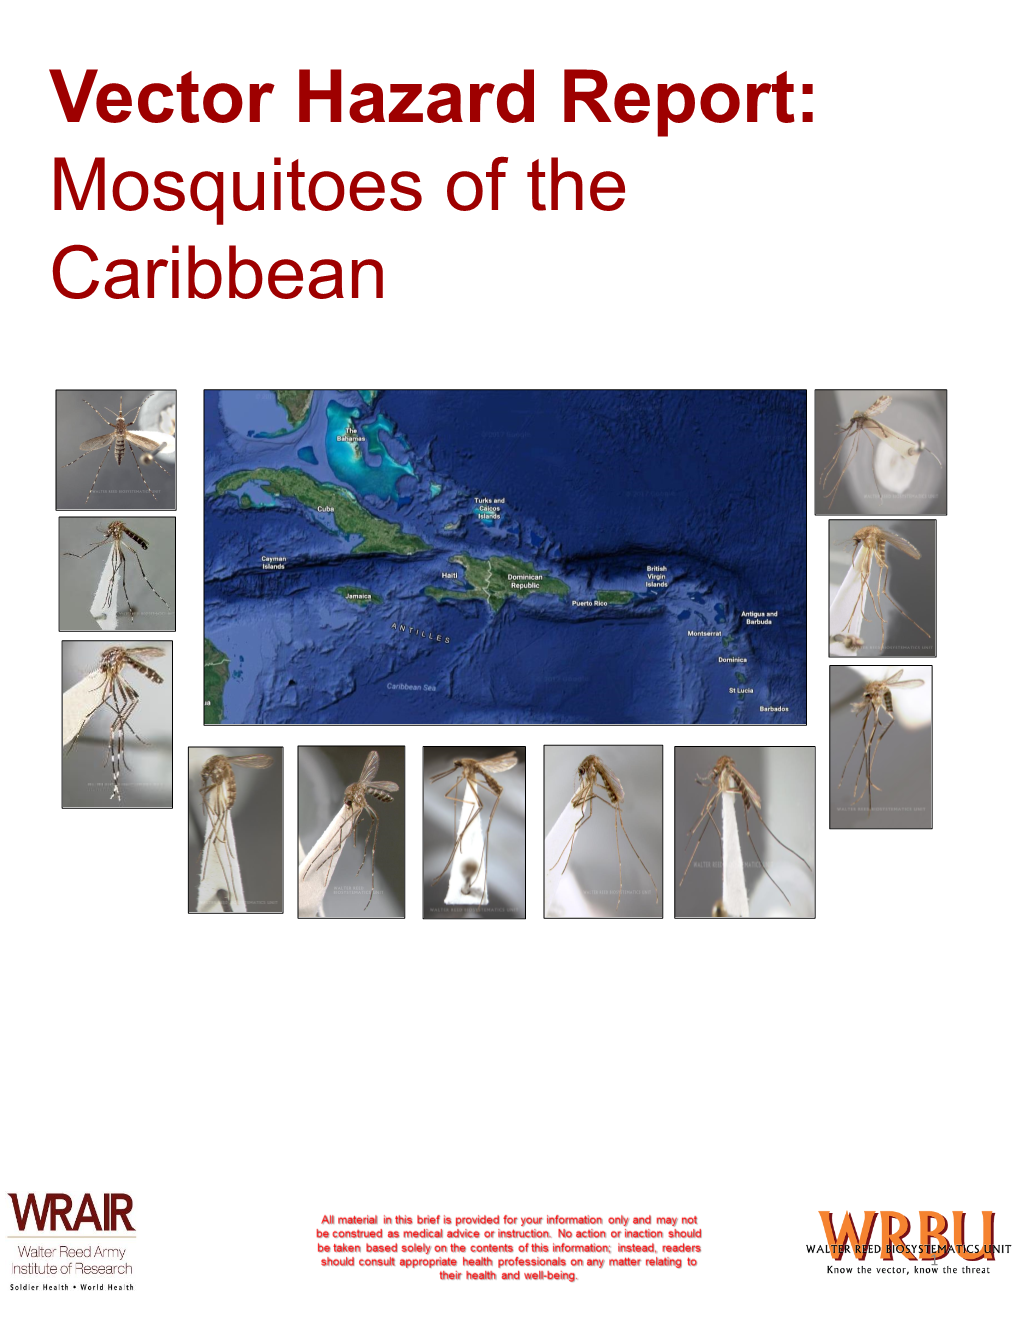 Mosquitoes of the Caribbean